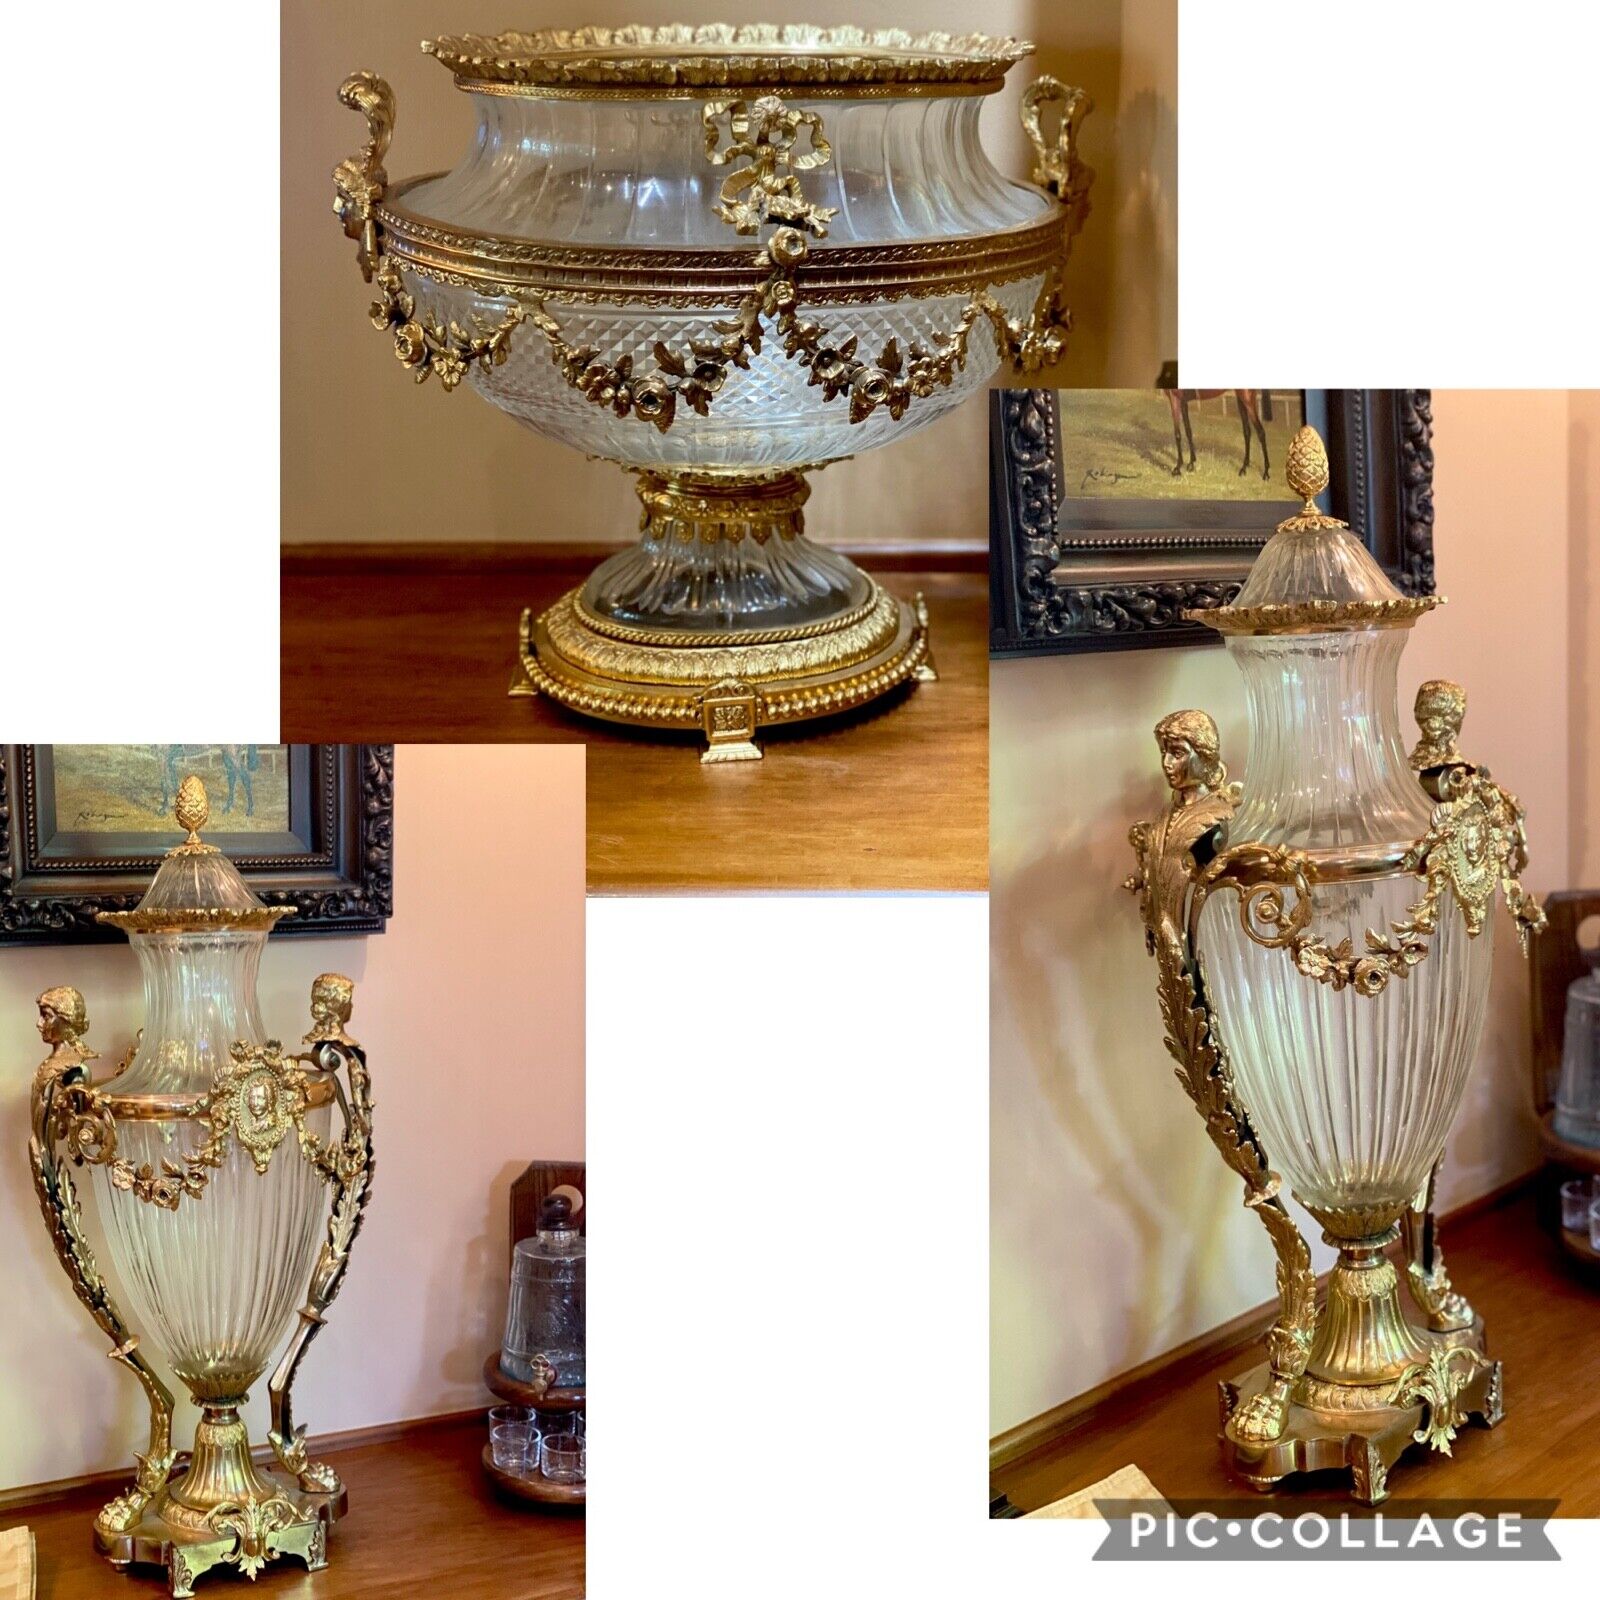 🎺 Baccarat StyLe 3 Glass + BRONZE GiLt NeoClassical Urns OvAL Vase